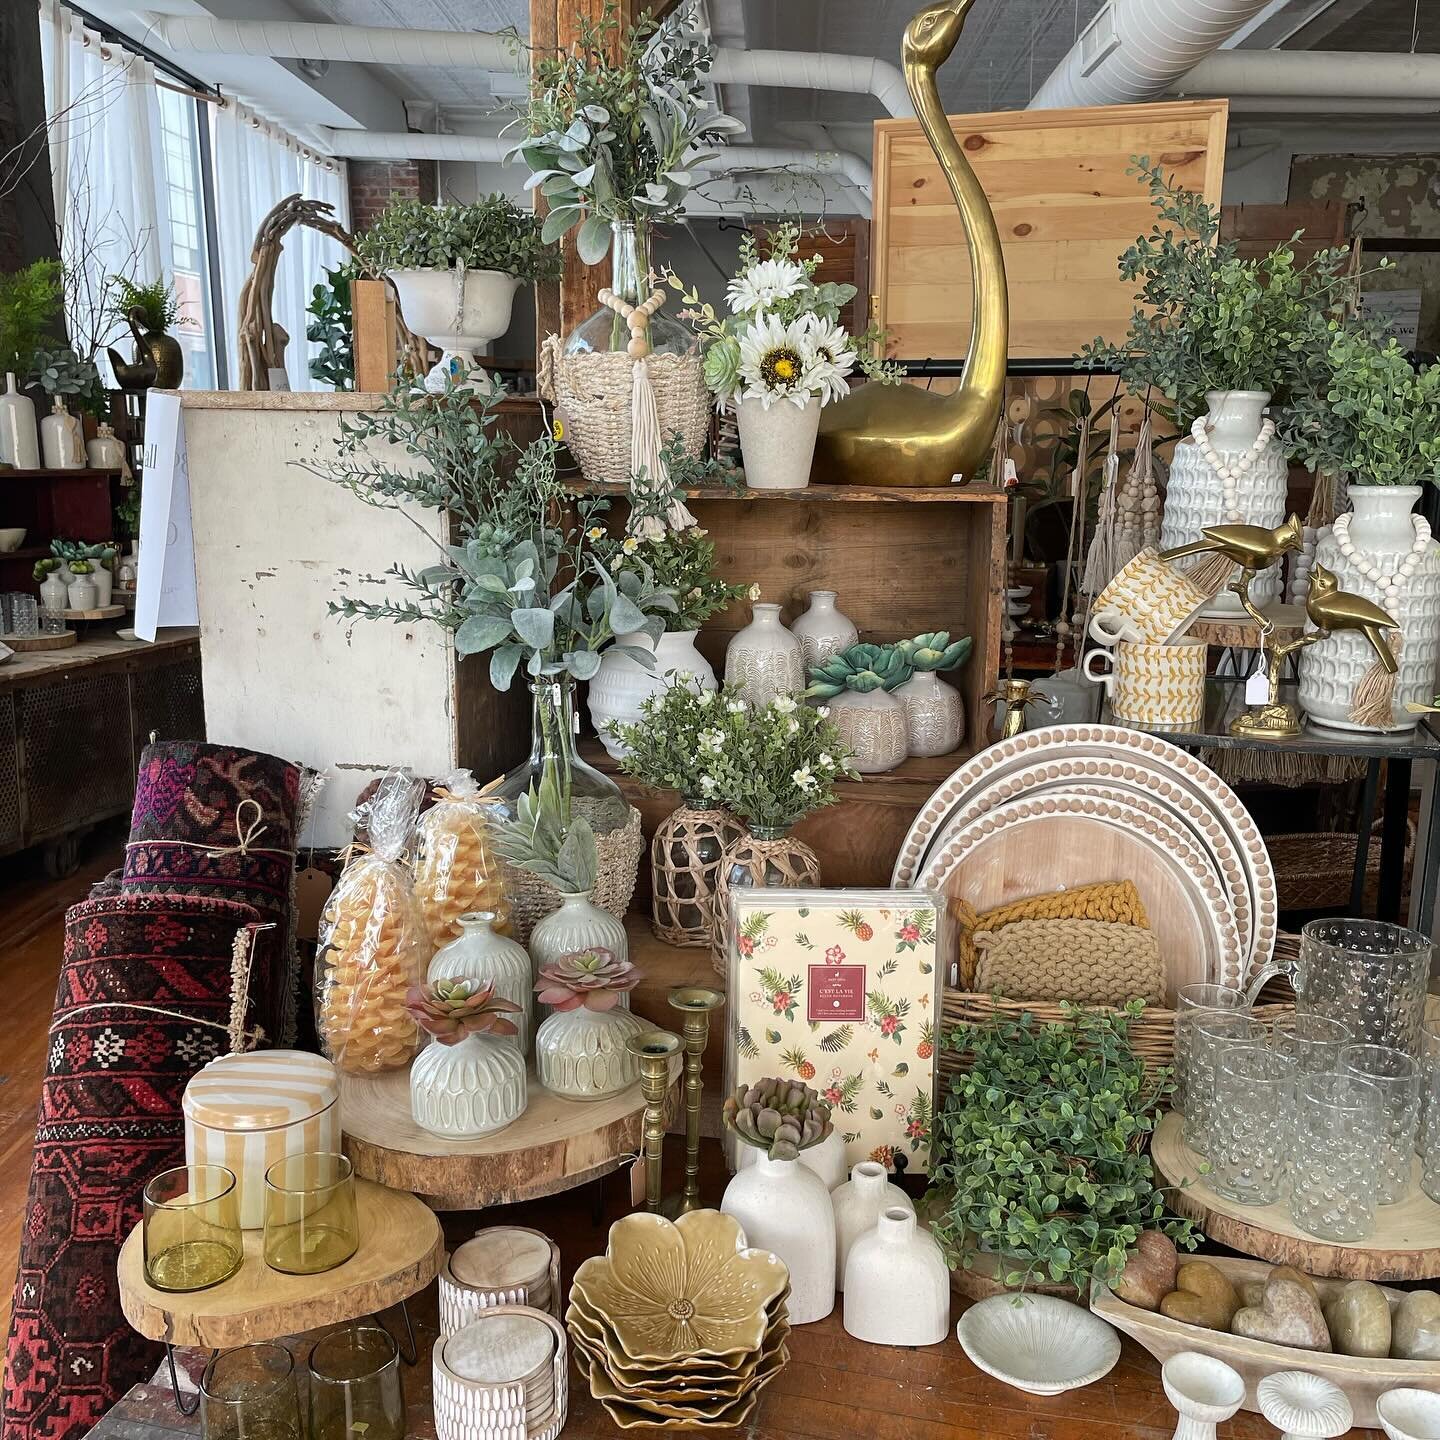 Alright friends, here are some updated current photos!! We are open today 11-5, Saturday 10-4, Sunday 10:30-3! Please note all sales are final and cash is preferred 🩷 

#bluebirdhomedecor #schenectady #shopsmall #